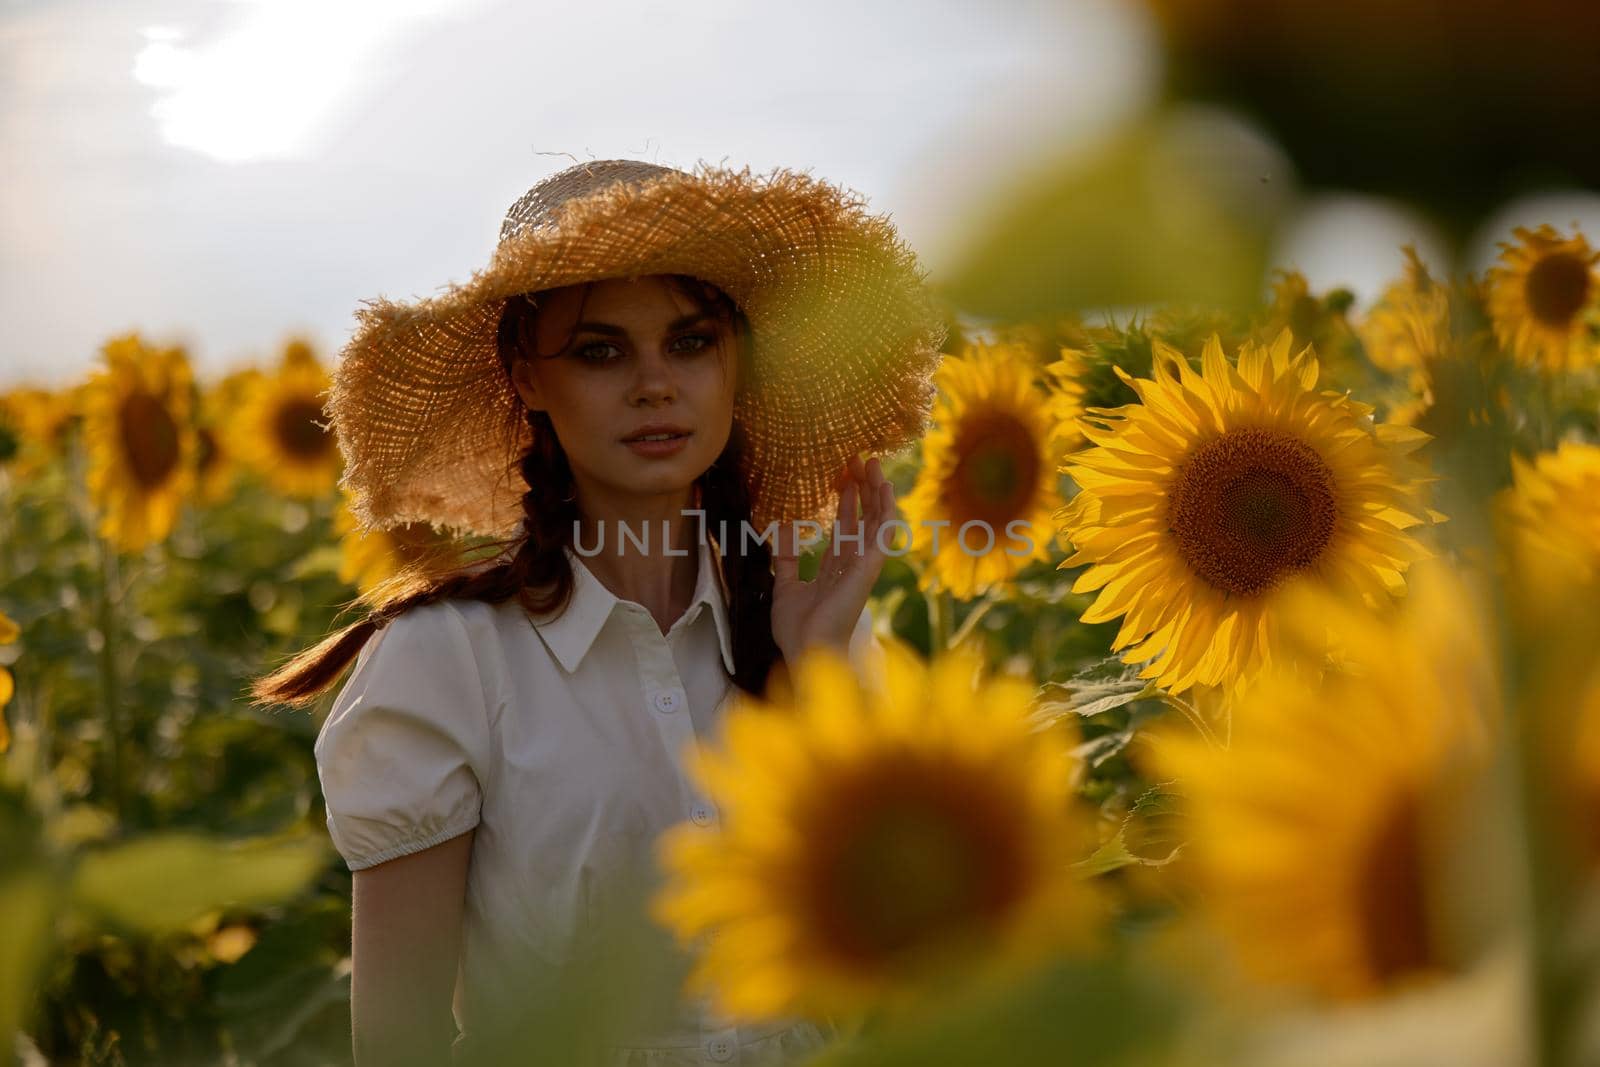 woman with two pigtails In a field with blooming sunflowers Summer time. High quality photo